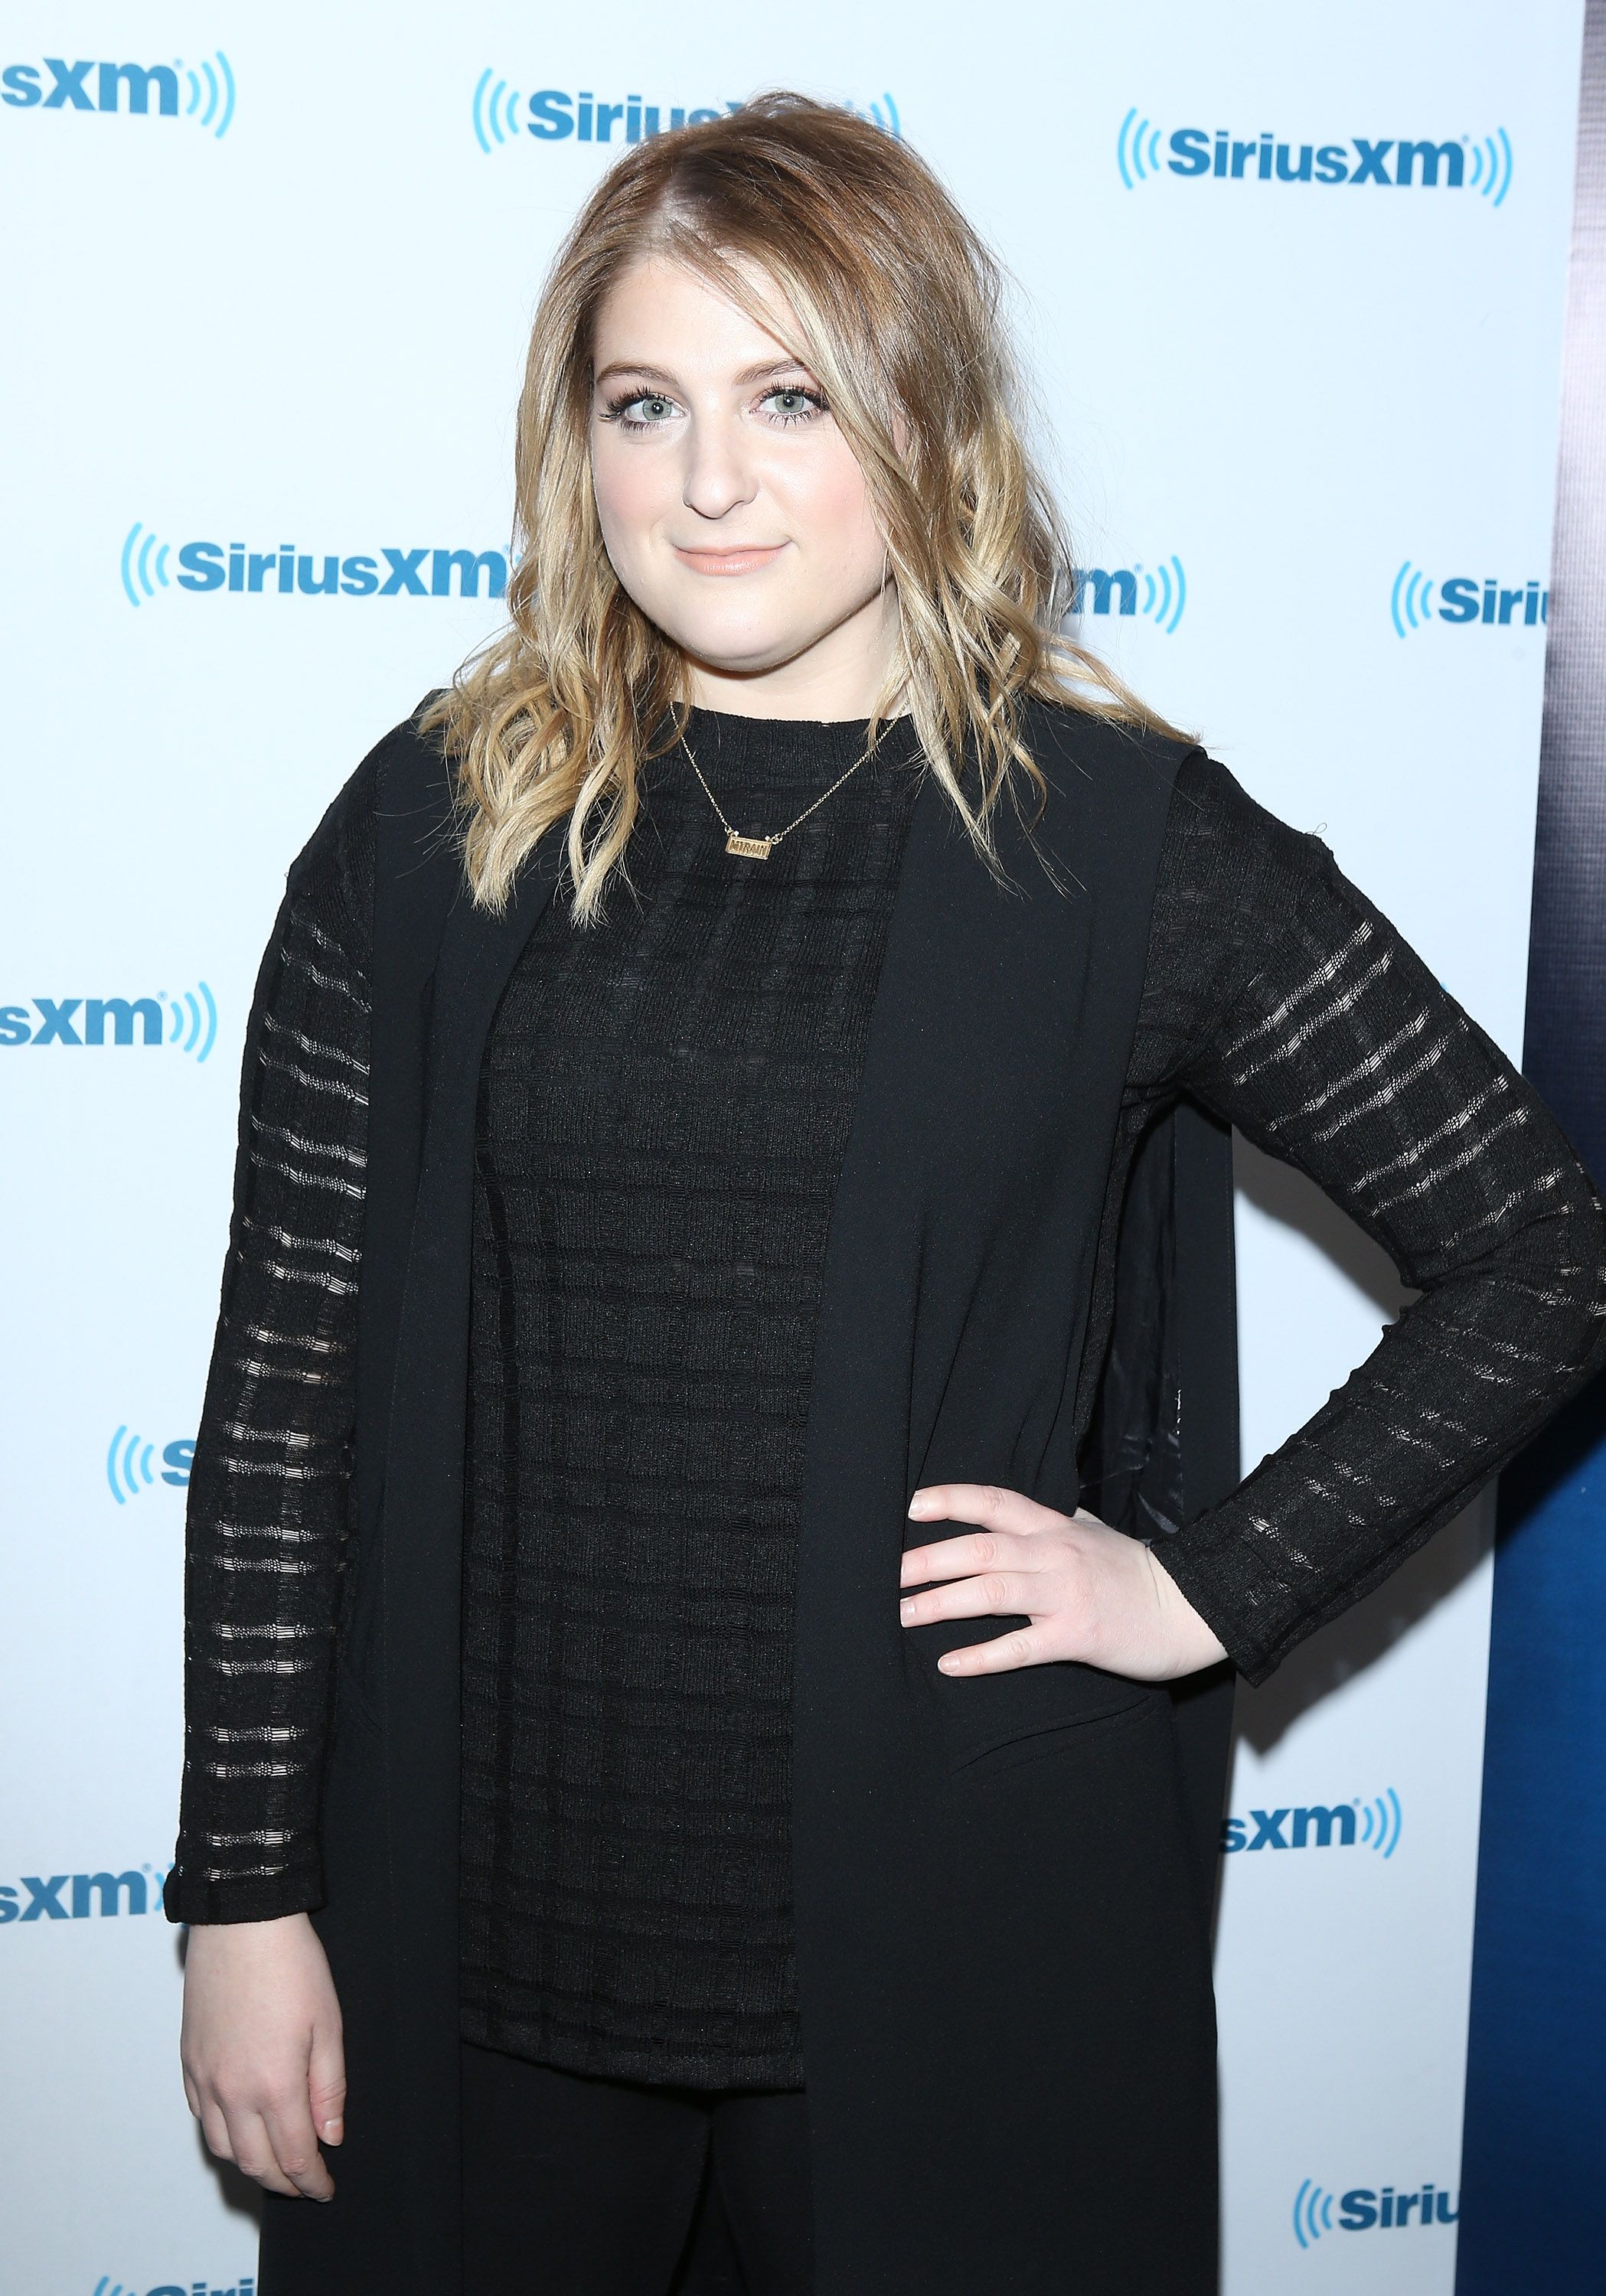 Meghan Trainor at the SiriusXM Hits 1's The Morning Mash Up broadcast on February 11, 2016, in Los Angeles, California | Photo: Michael Tran/Getty Images